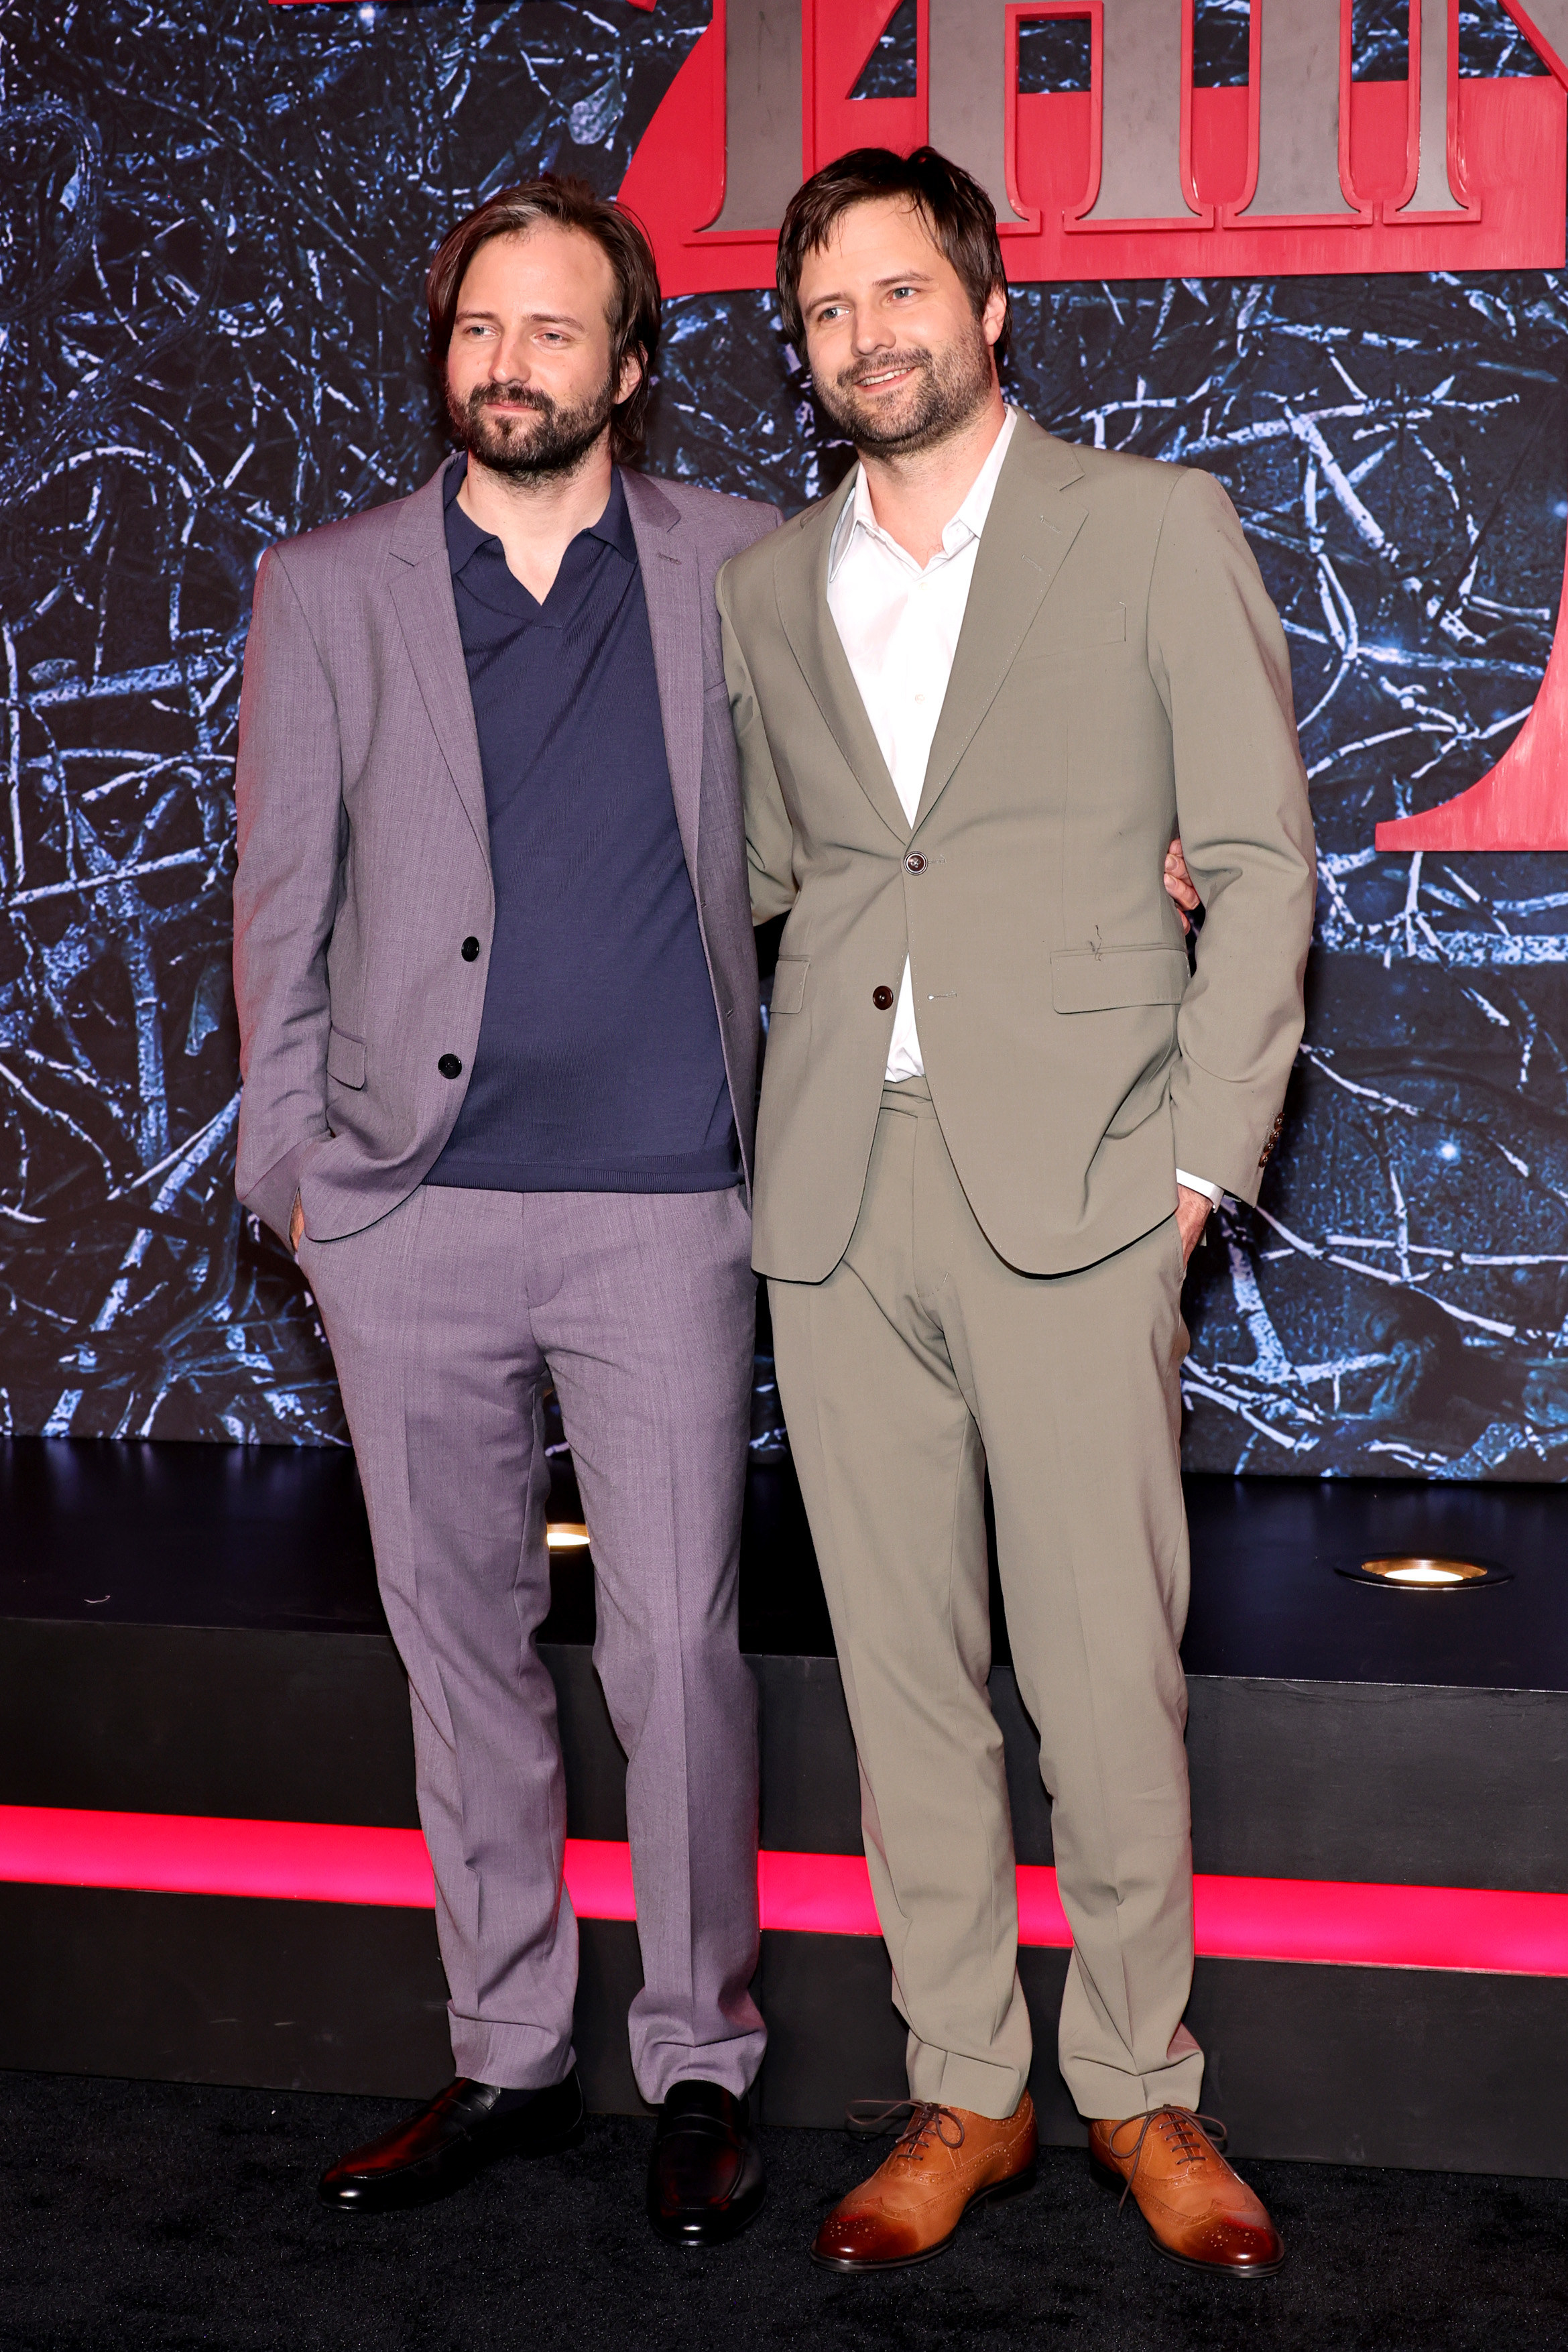 The Duffer brothers standing together